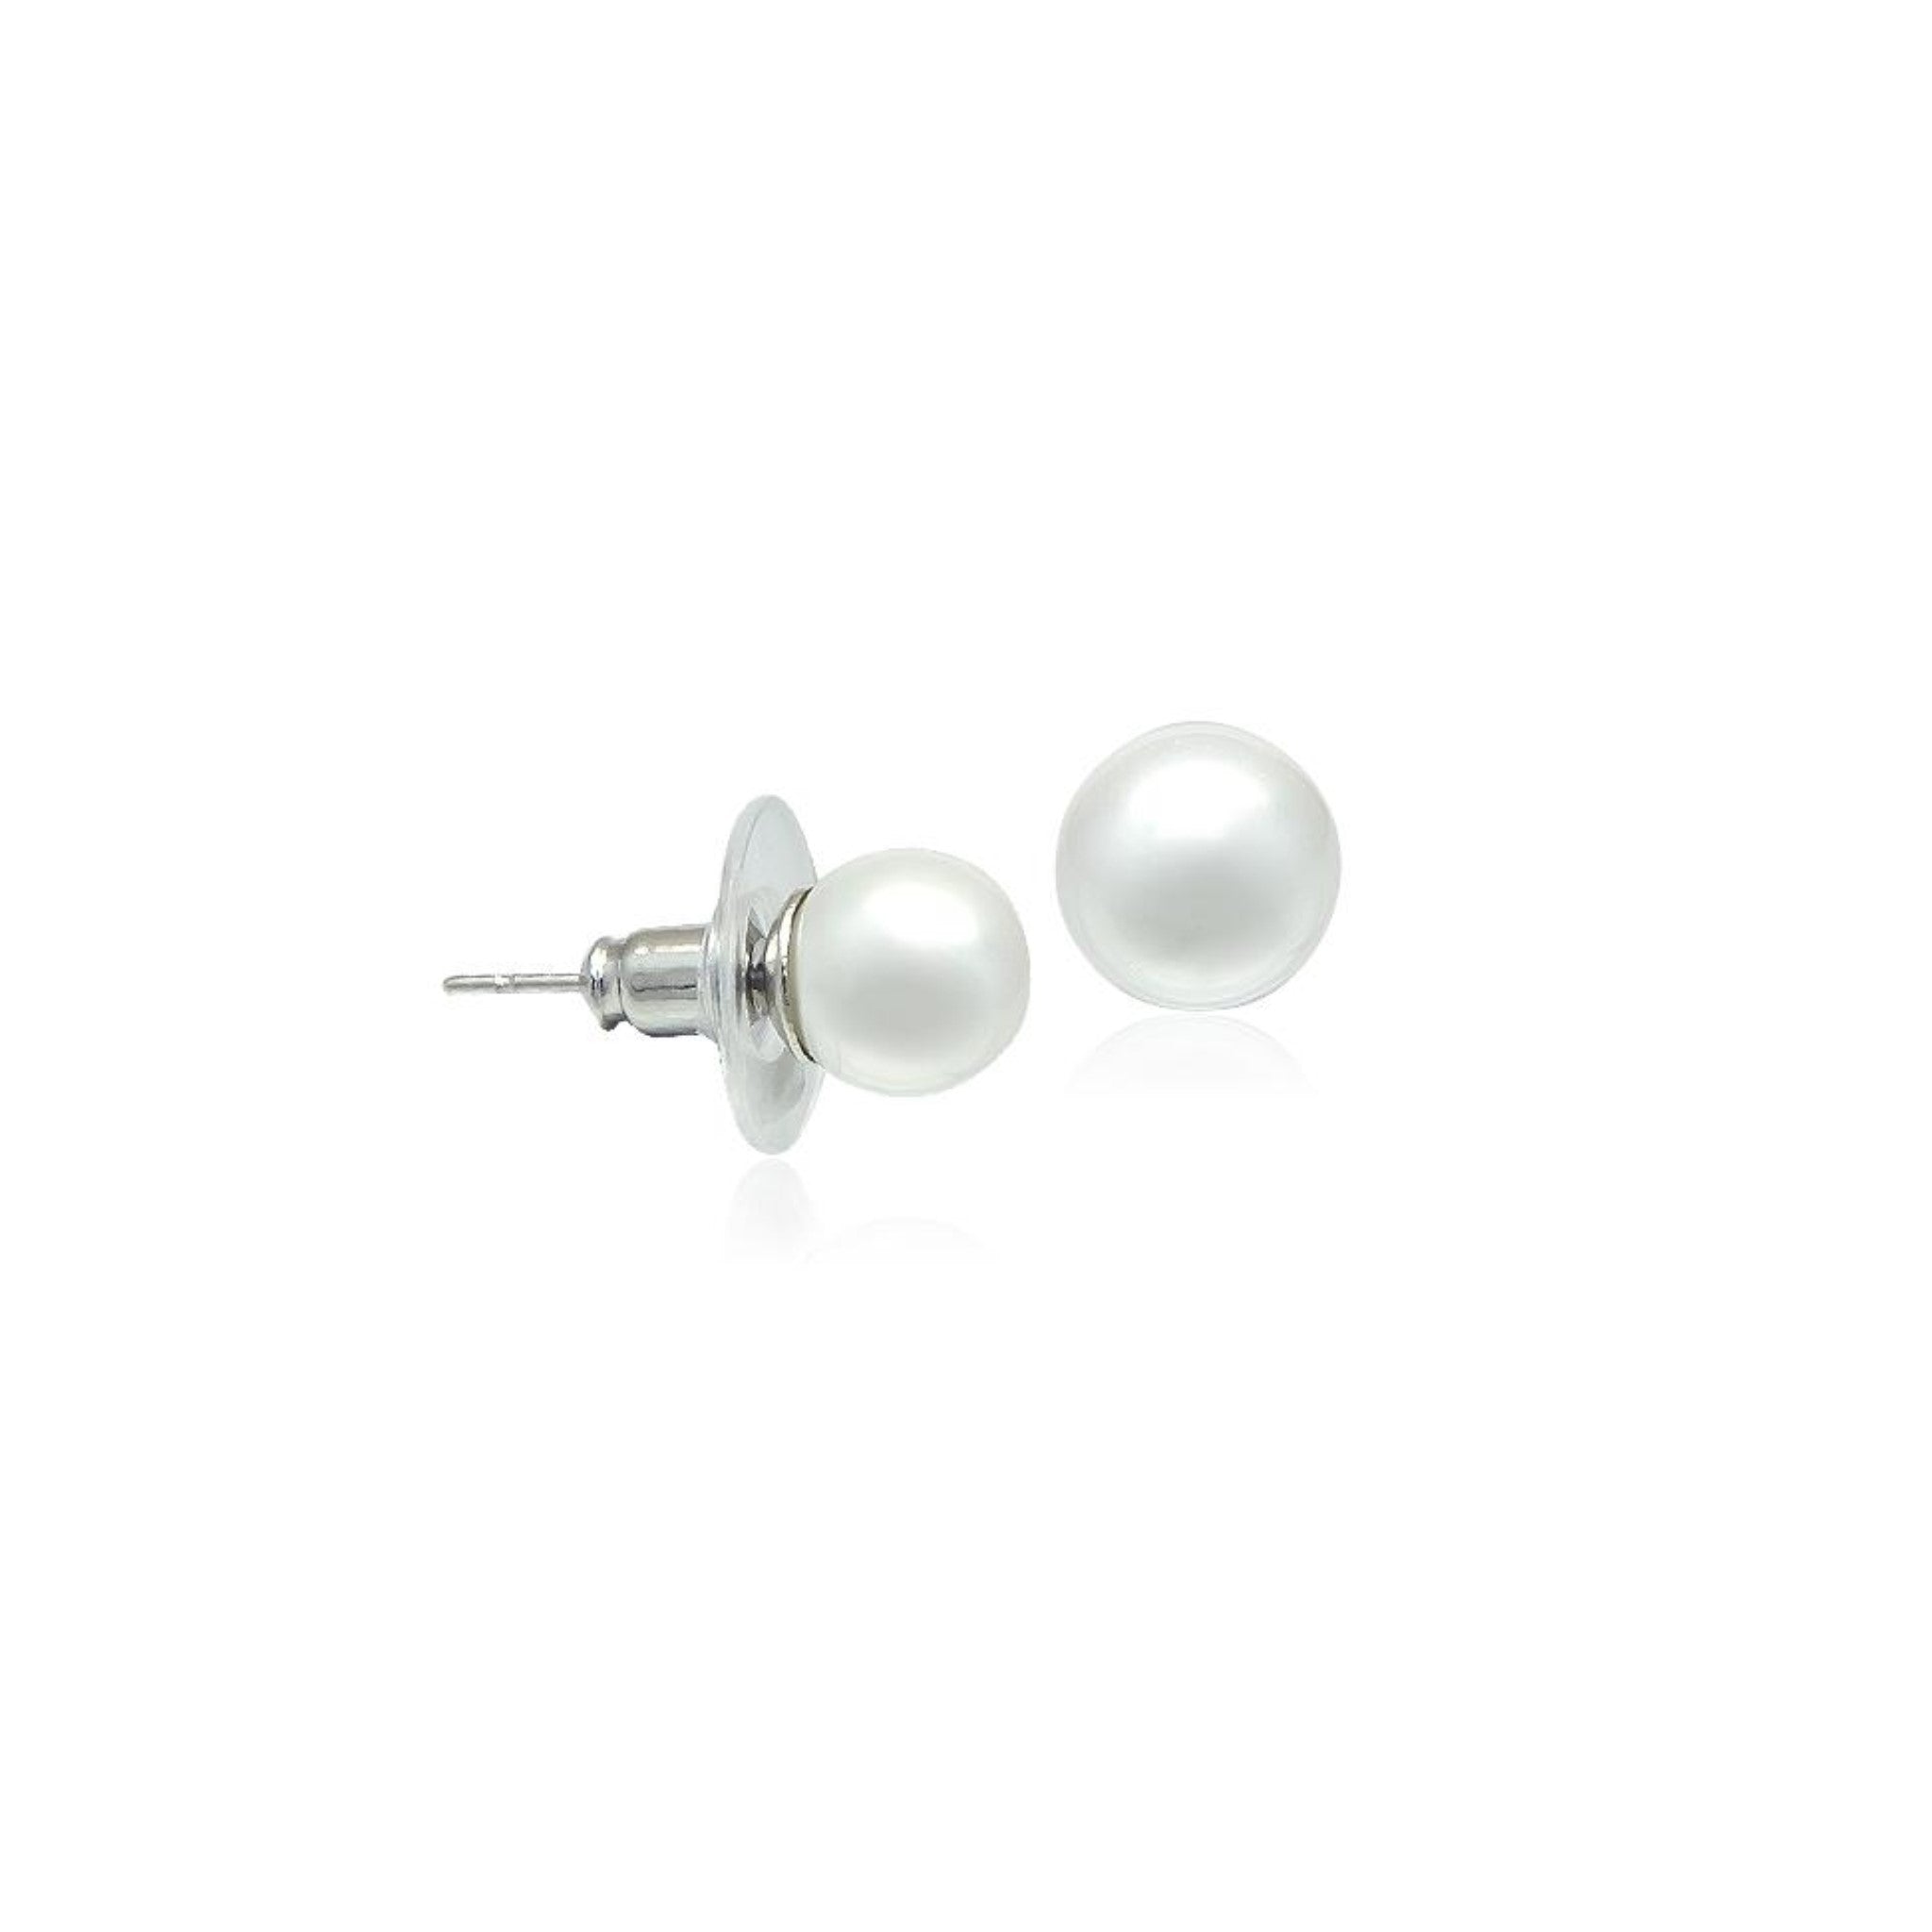 Simulated Pearl 8mm Round Earring.